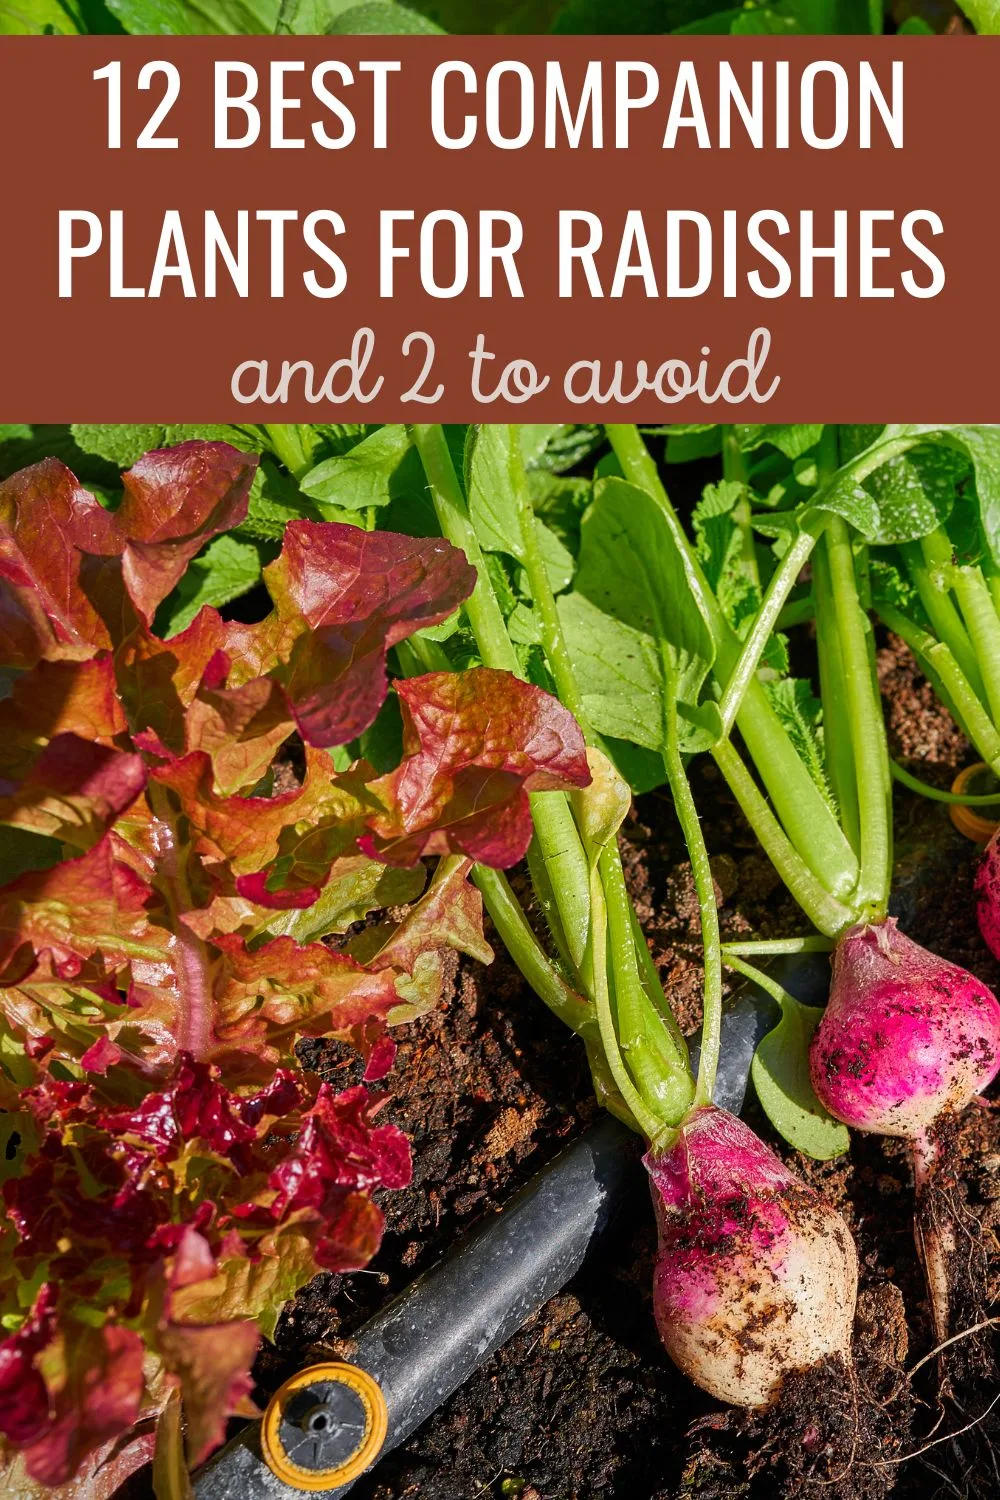 12 Best Companion Plants for Radishes (And 2 to Avoid)